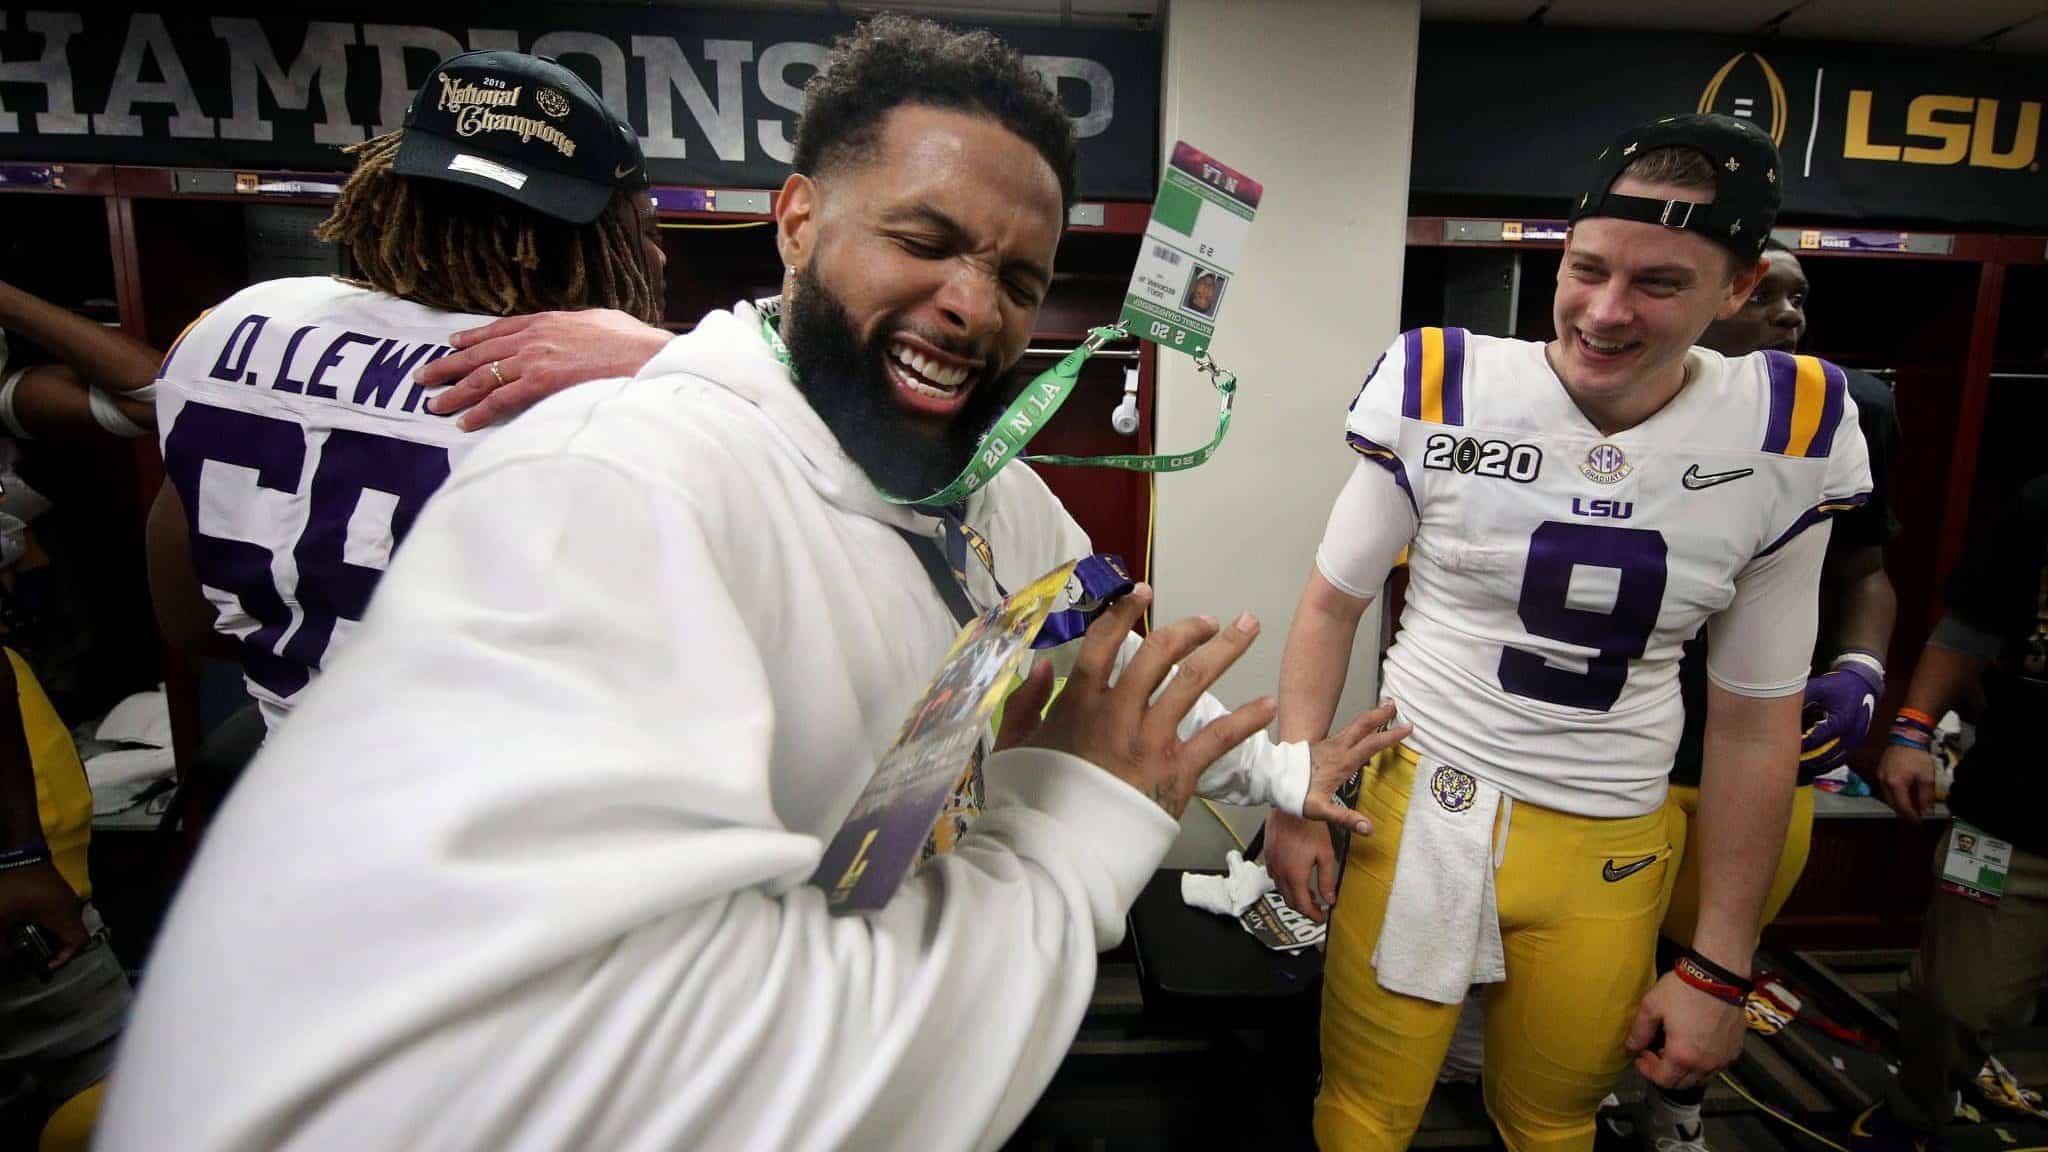 NEW ORLEANS, LOUISIANA - JANUARY 13: Odell Beckham Jr. celebrates in the locker room with Joe Burrow #9 of the LSU Tigers after their 42-25 win over Clemson Tigers in the College Football Playoff National Championship game at Mercedes Benz Superdome on January 13, 2020 in New Orleans, Louisiana.